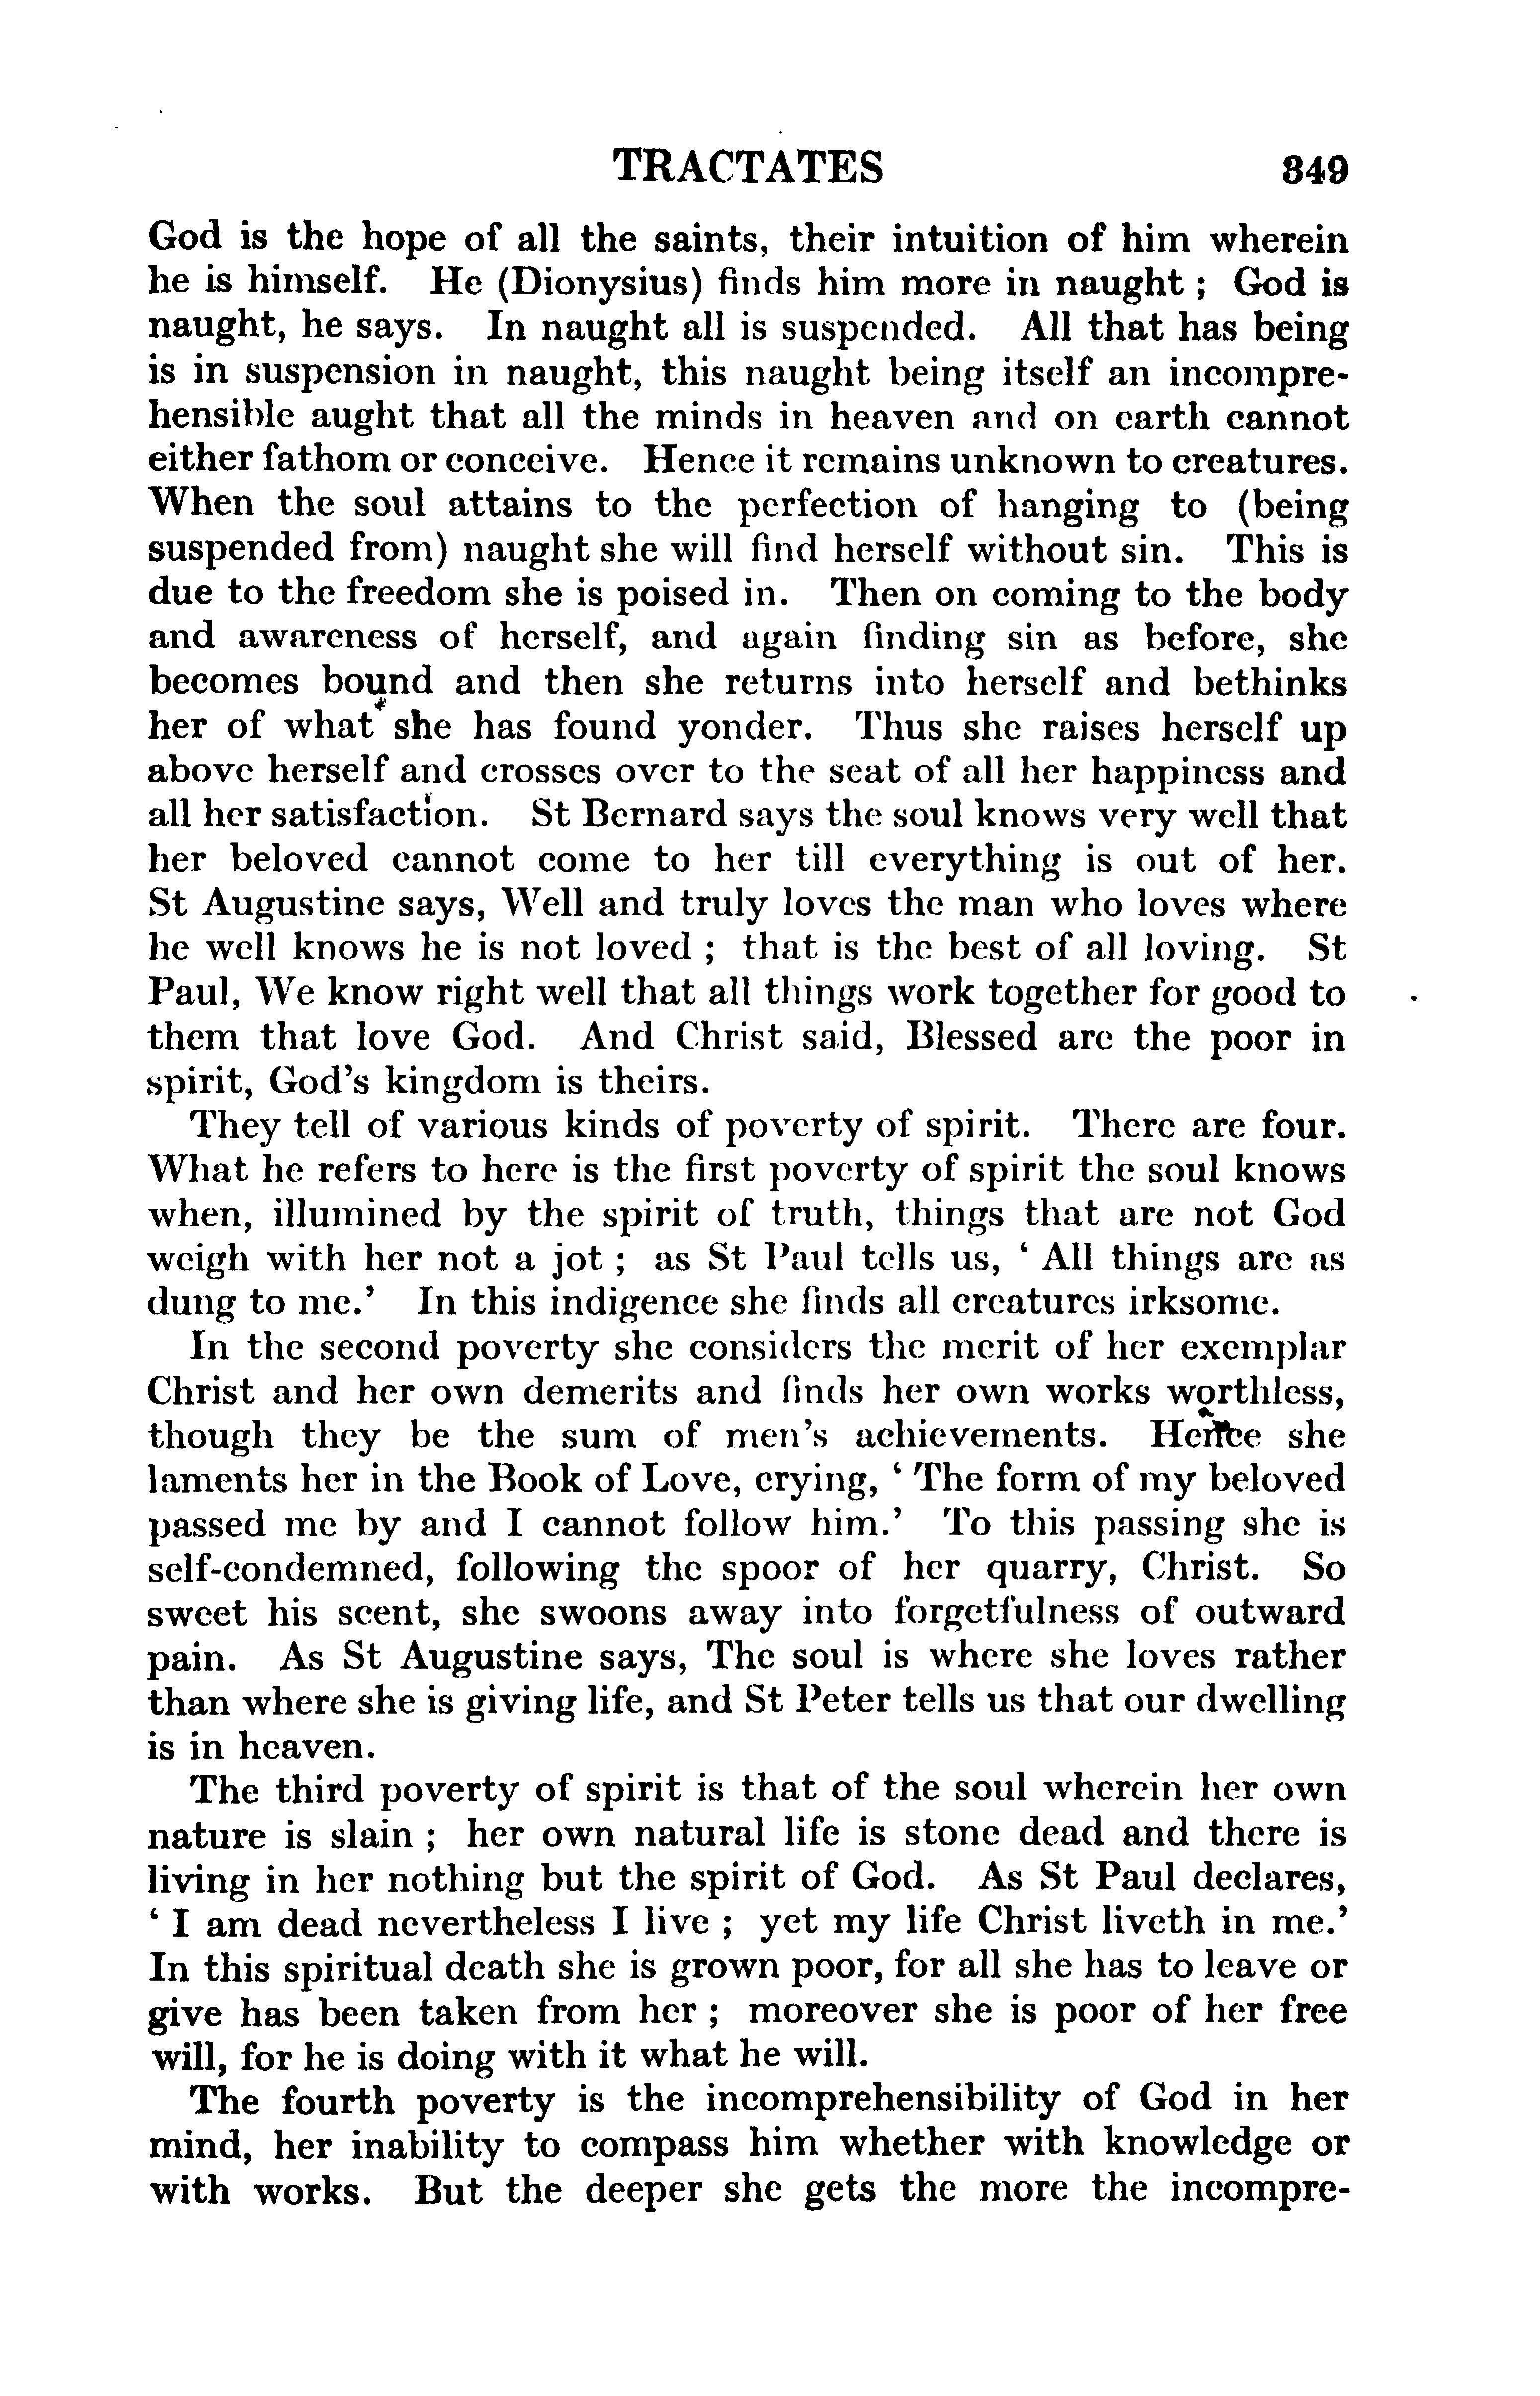 Image of page 0373